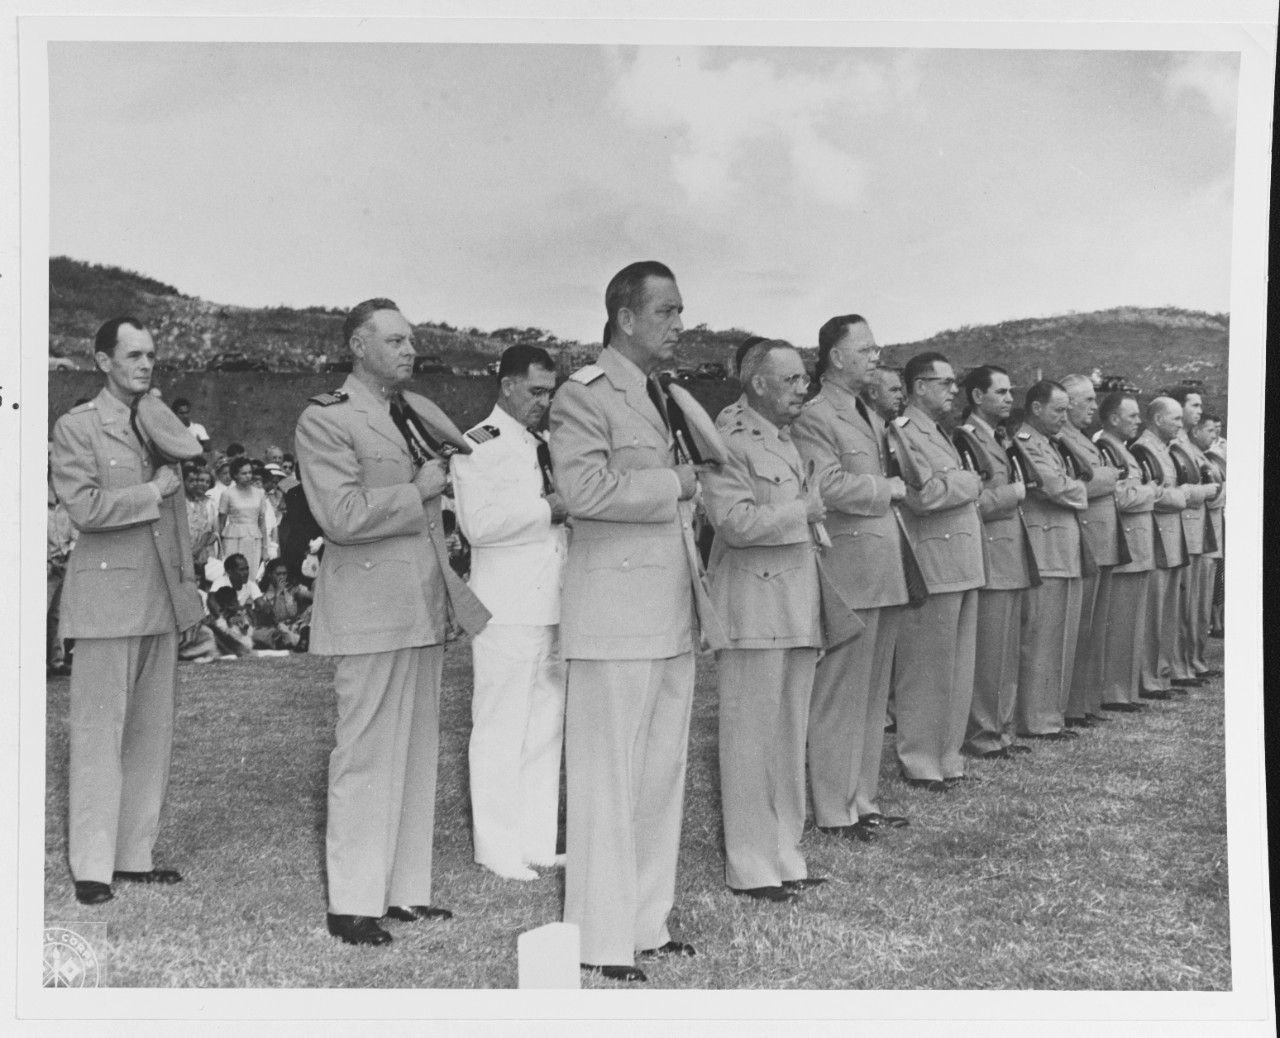 Burial service for Ernie Pyle, Punchbowl Memorial Cemetery of the Pacific, Oahu, Hawaii, 19 July 1949.